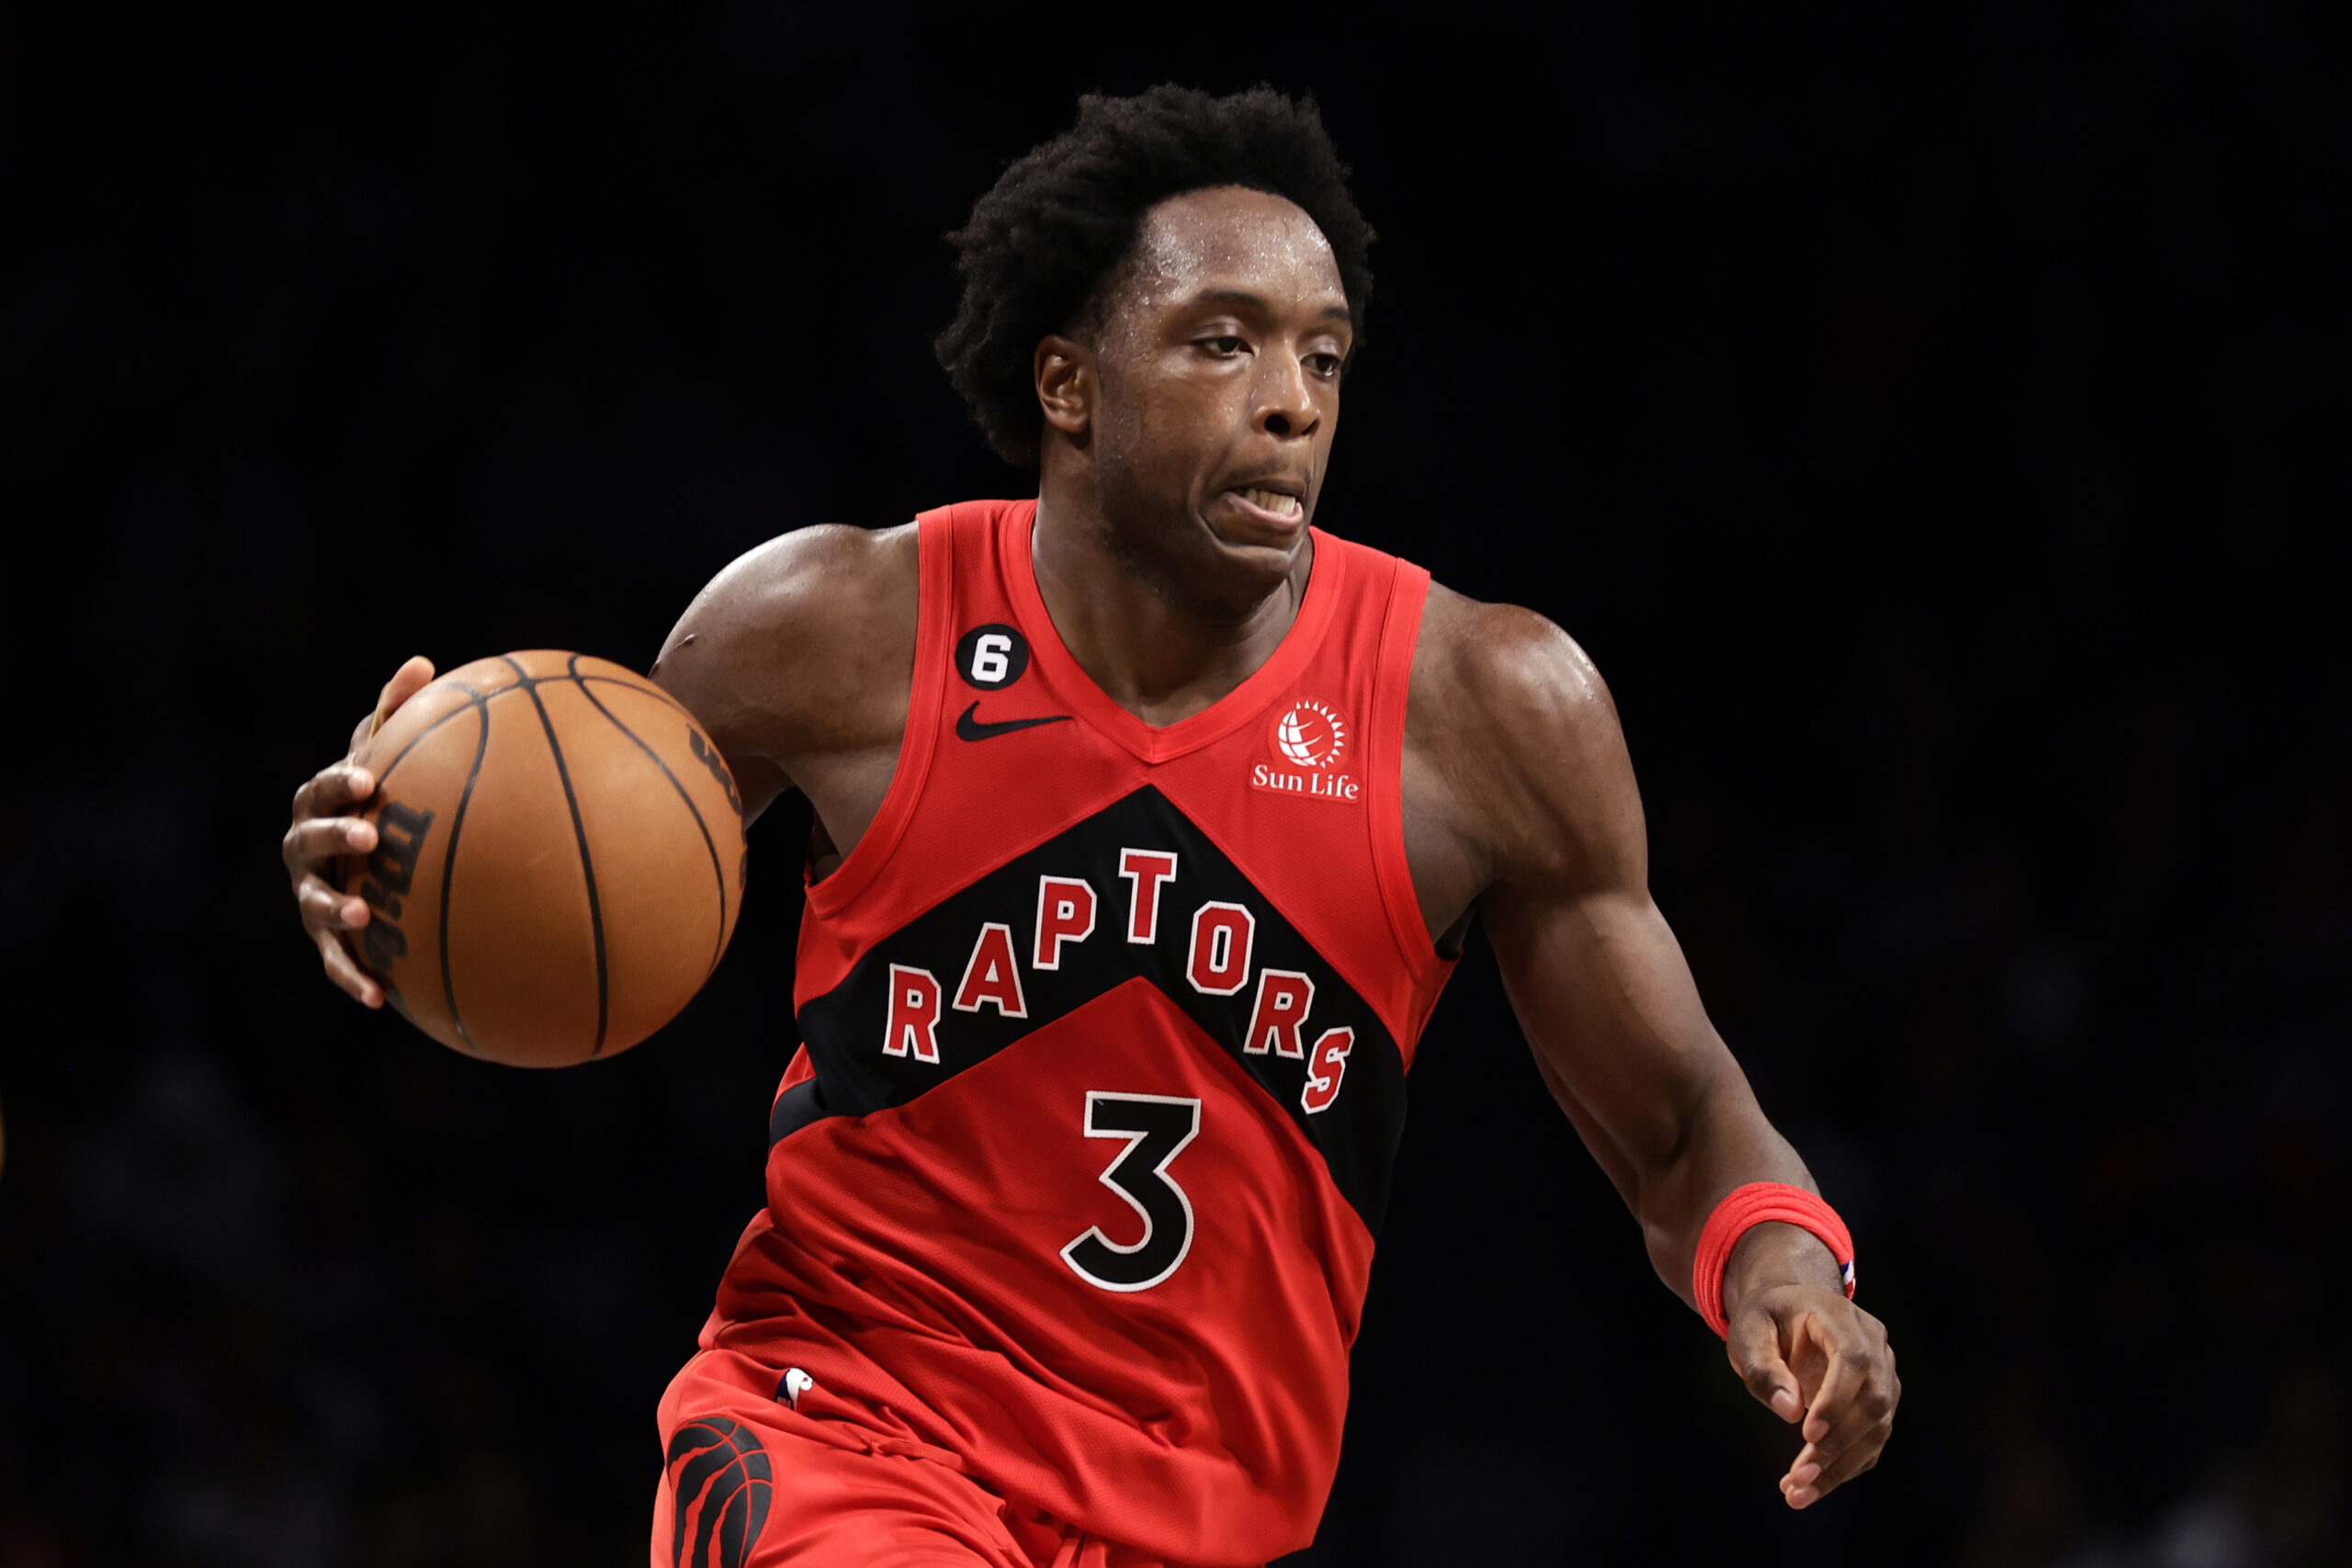  Memphis Grizzlies to Acquire OG Anunoby from the Toronto Raptors in Blockbuster Deal